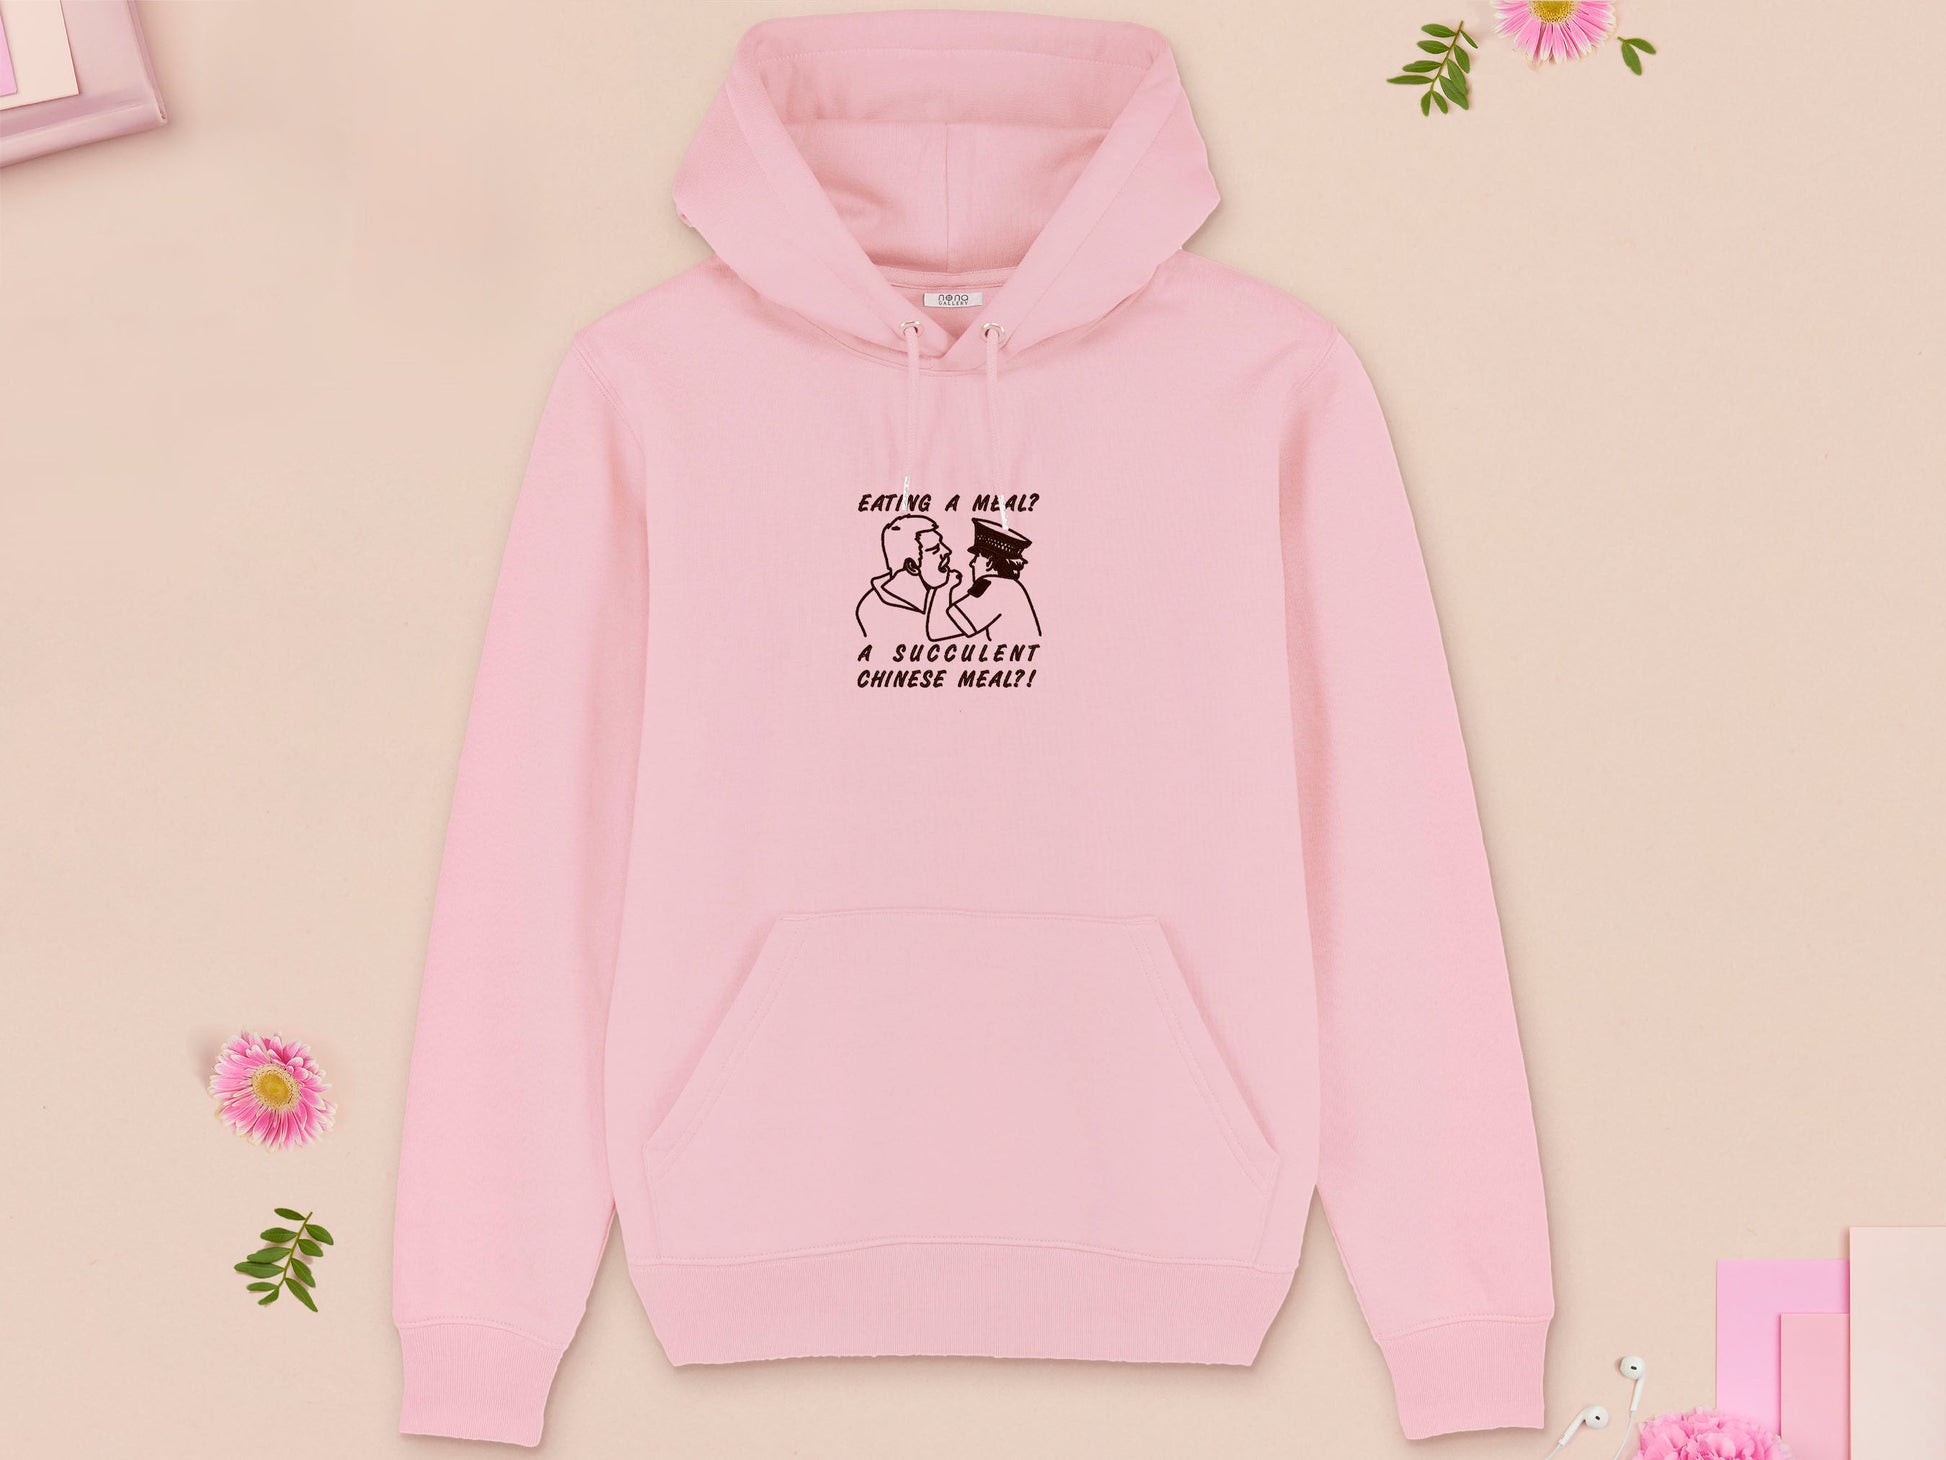 A pink long sleeve fleece hoodie, with an embroidered brown thread design of the viral democracy manifest video of Charles Dozsa being arrested by a policeman with the text reading Eating A Meal? A Succulent Chinese Meal?!